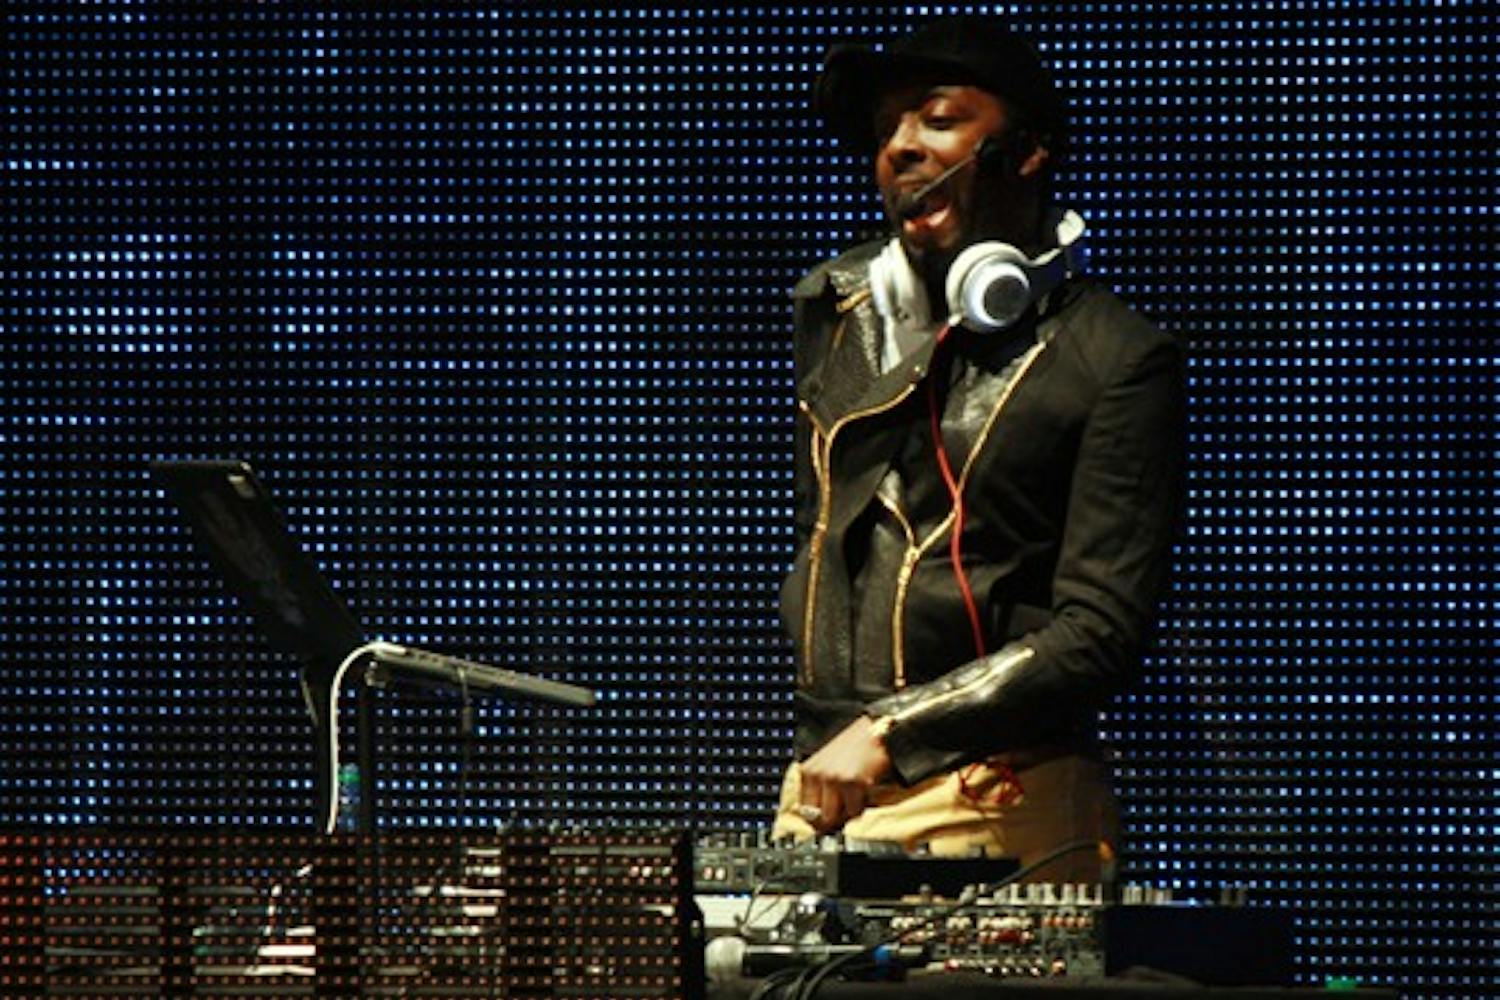 DJ and singer Will.i.am rocks the crowd with some heavy beats at the Phoenix Open golf tournament Friday, Feb. 3 in Scottsdale. (Photo by Shelby Bernstein)